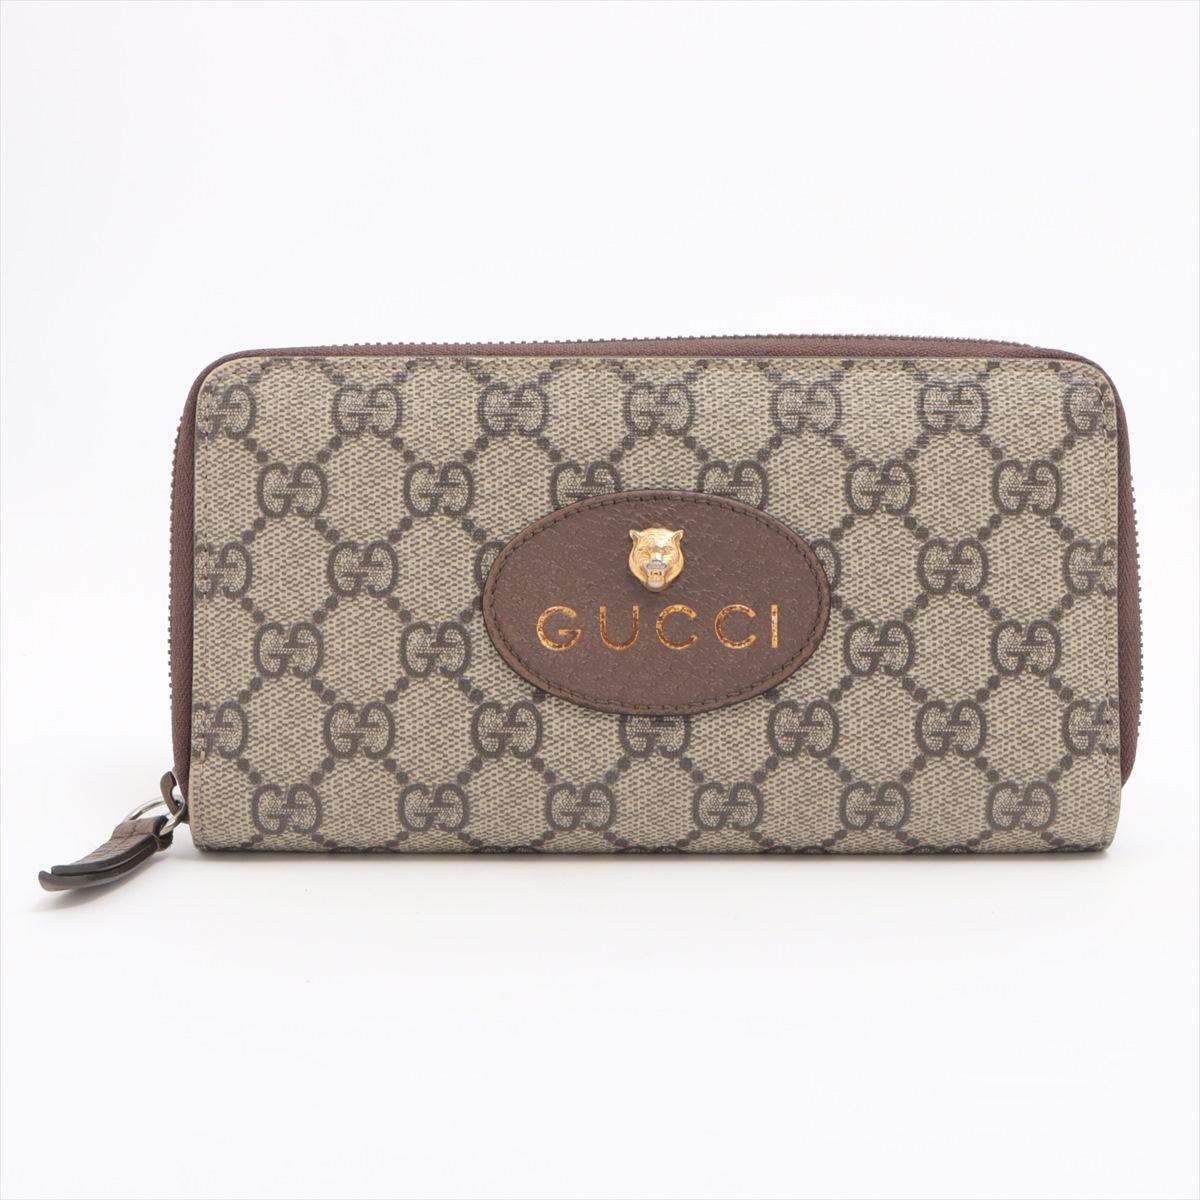 The Gucci Neo GG Supreme Round Long Wallet in Brown epitomizes the brand's commitment to blending iconic design with contemporary flair. Crafted from the distinctive GG Supreme canvas, the wallet features the instantly recognizable interlocking G